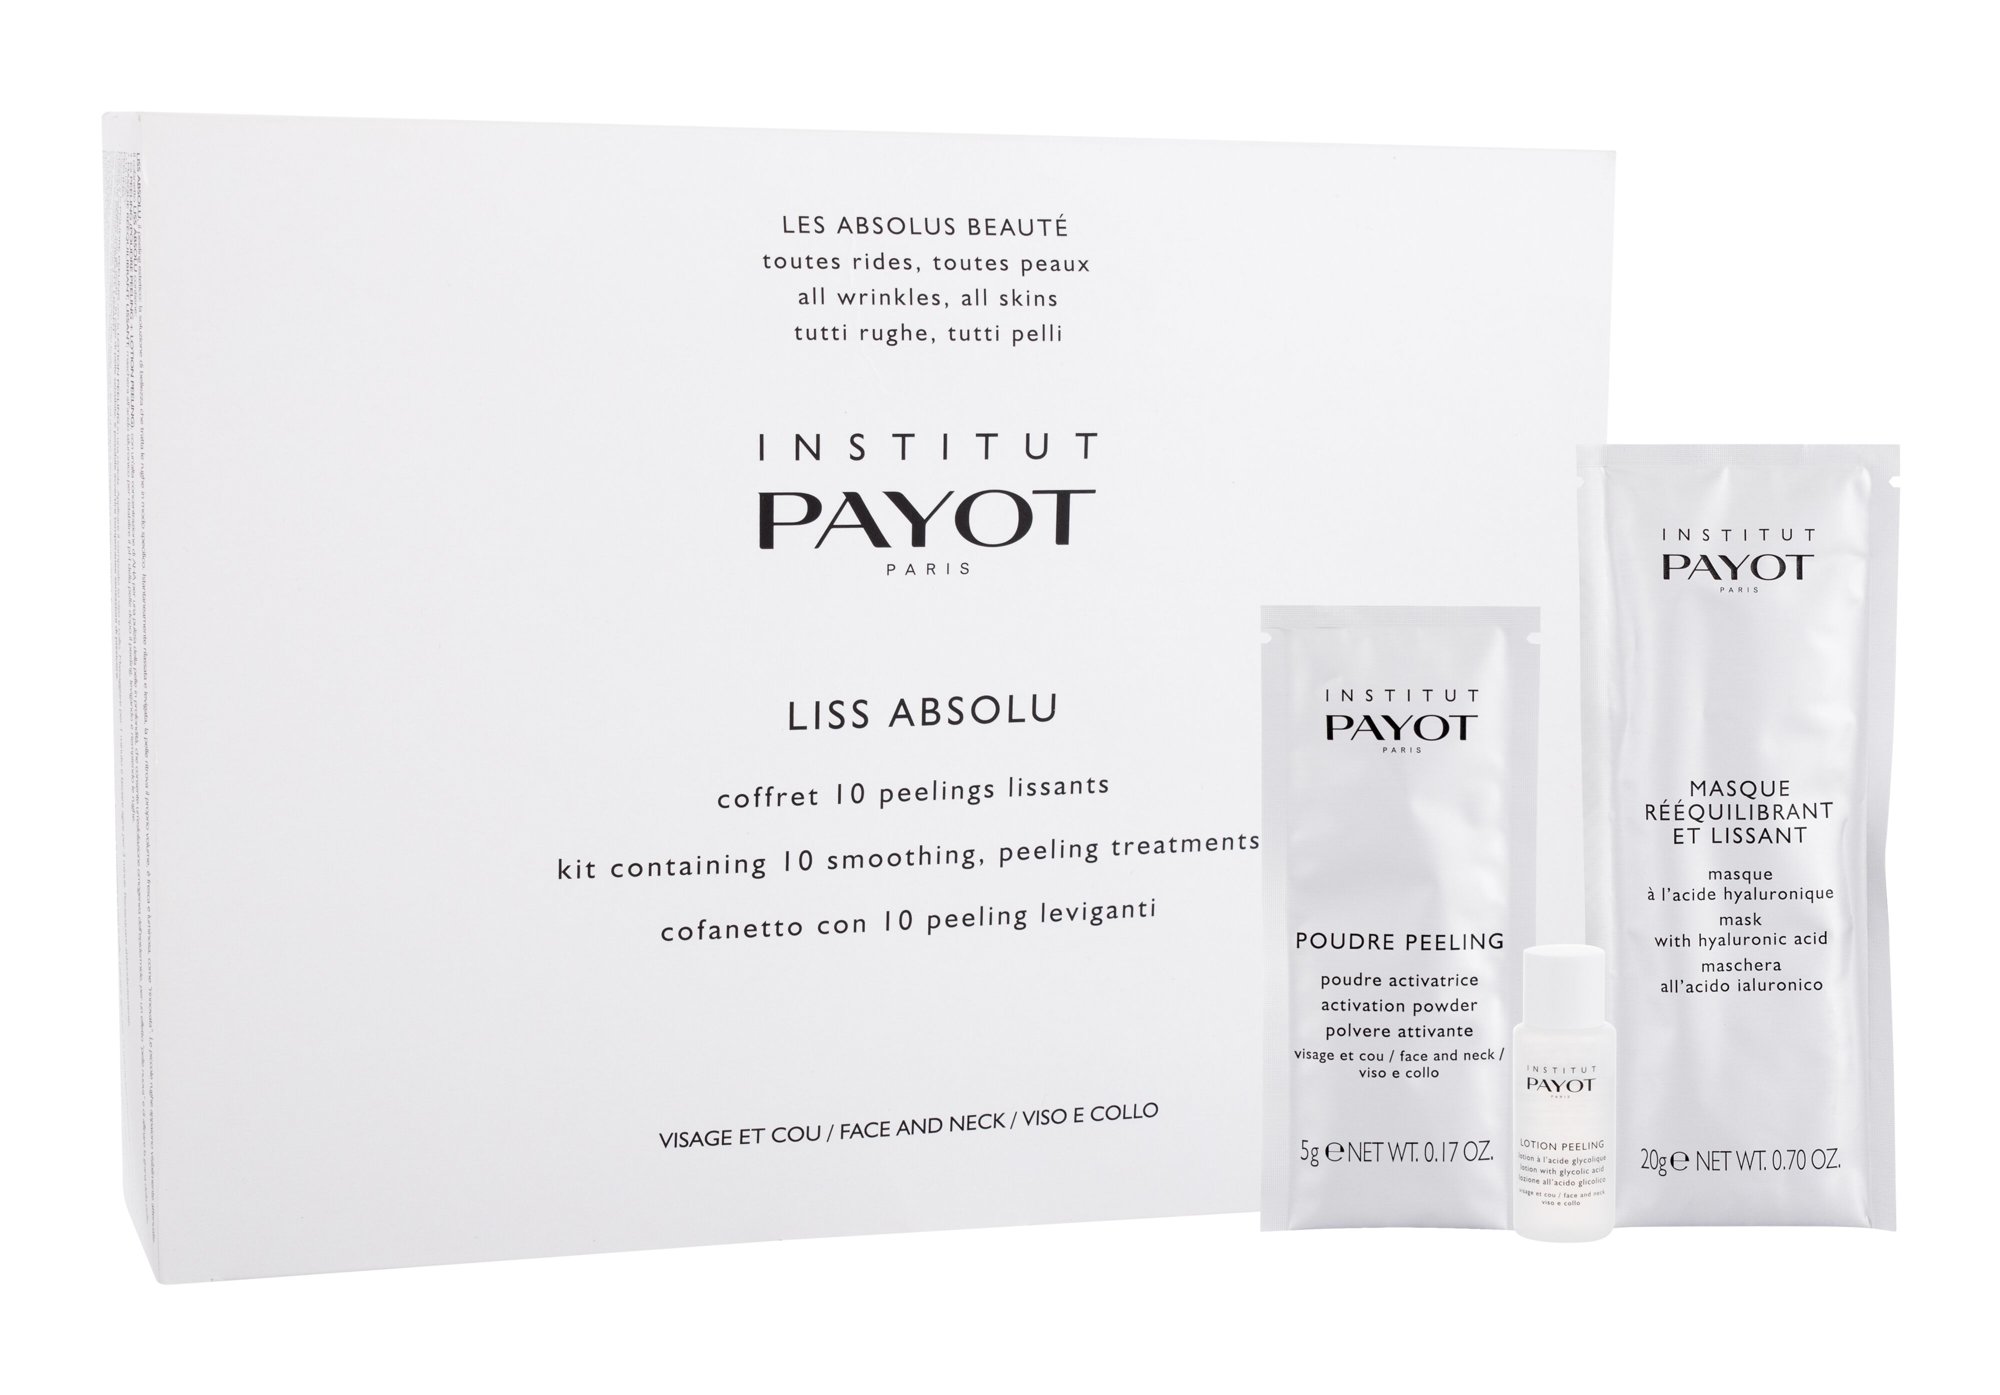 Payot Liss Absolu 100ml Lotion Peeling 10 x 10 ml + Poudre Peeling Activation Powder 10 x 5 g + Mask with Hyaluronic Acid 10 x 20 g pilingas Rinkinys